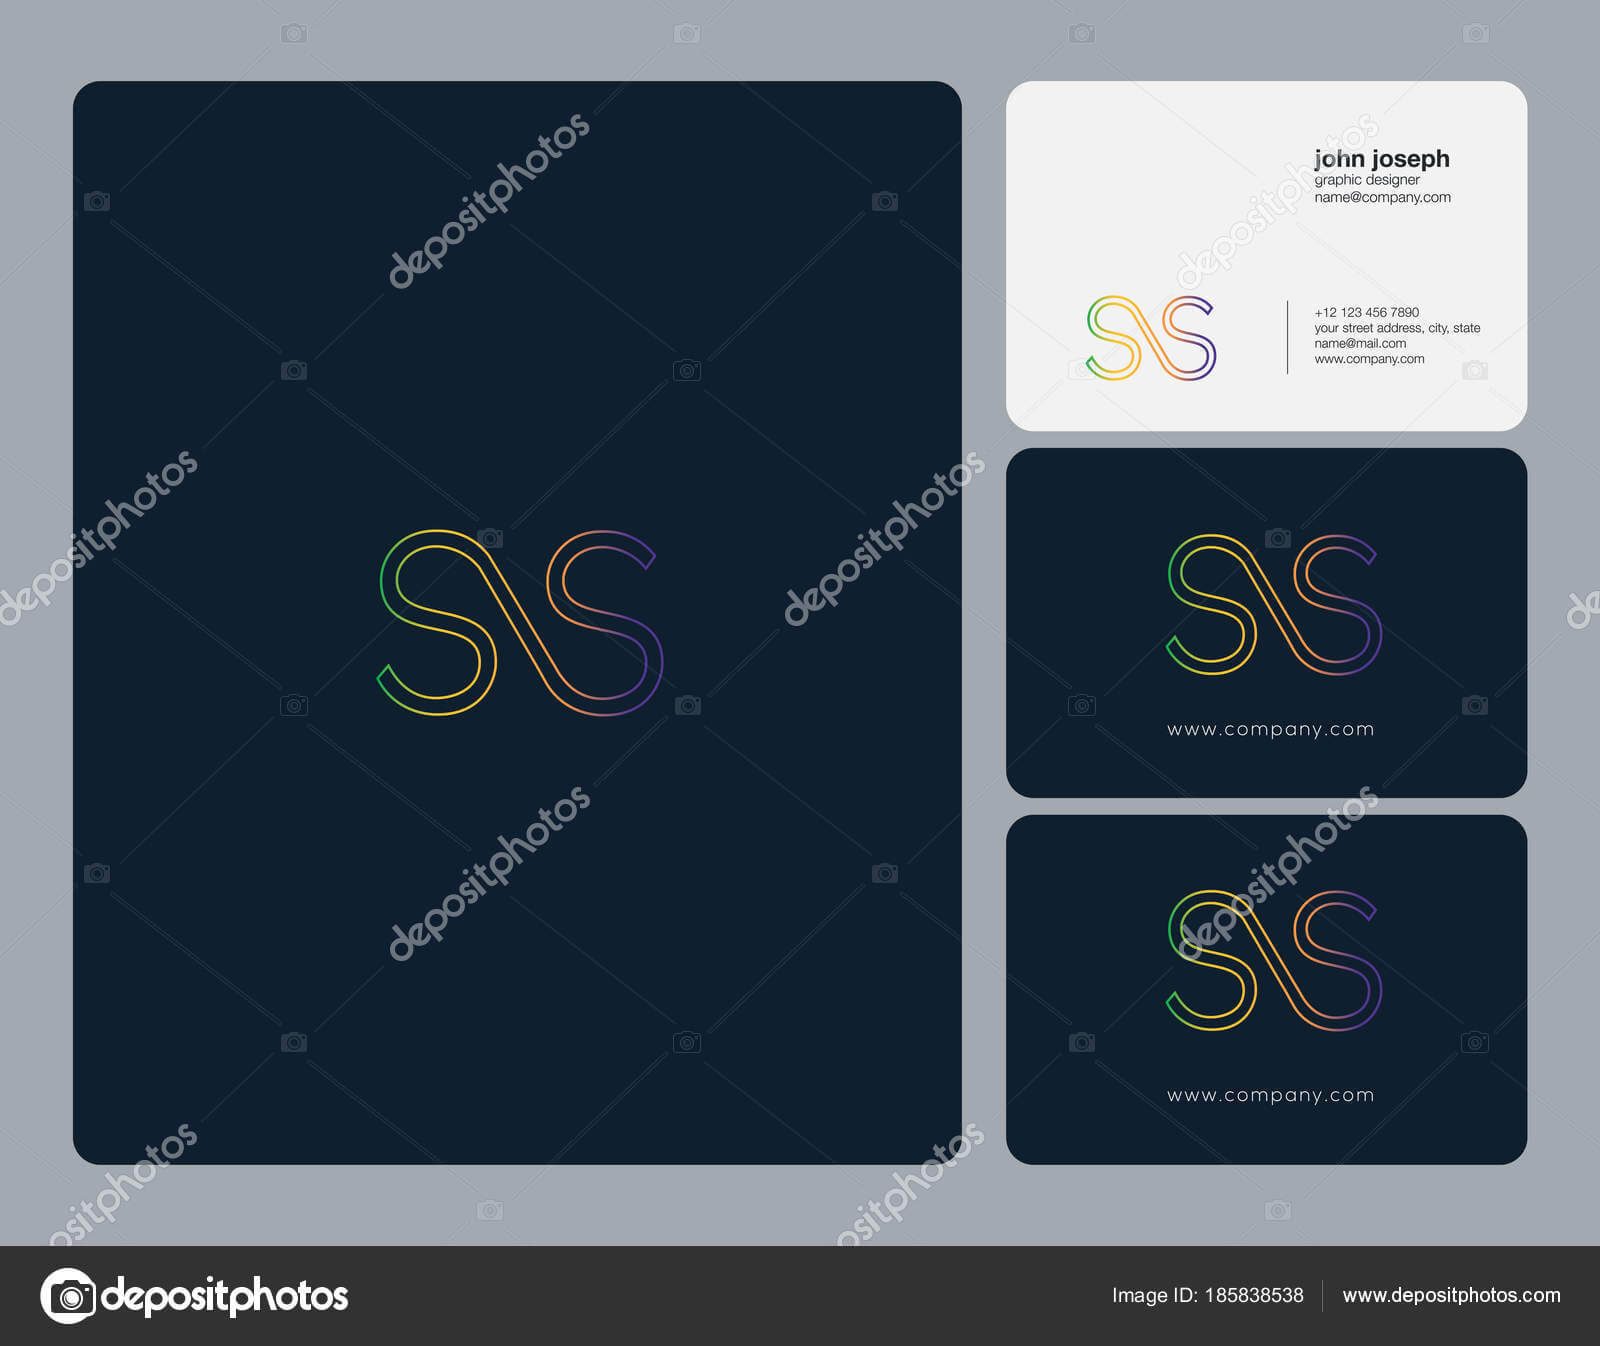 Ss Card Template | Joint Letters Logo Business Card Template Intended For Ss Card Template